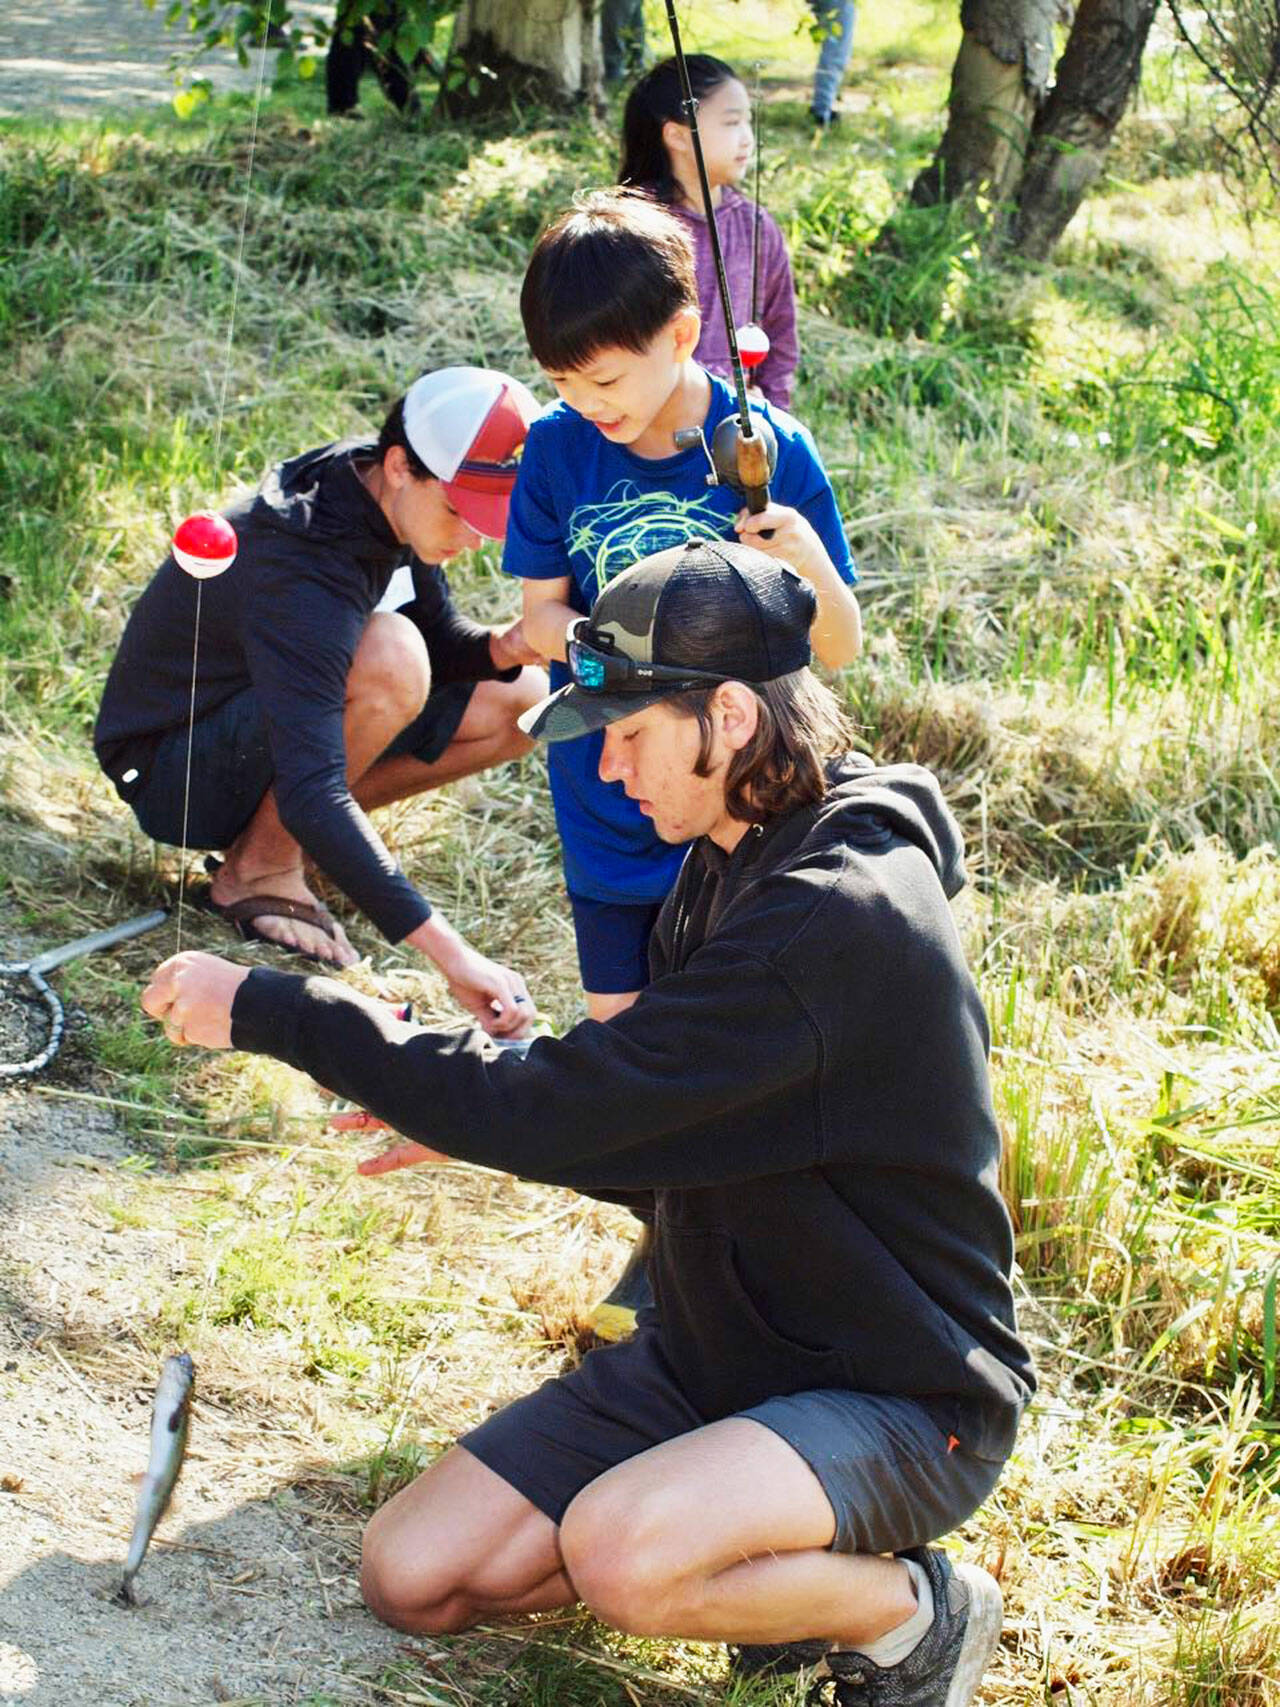 More than 100 kids took part in the fishing day. COURTESY PHOTO, Ken Parks